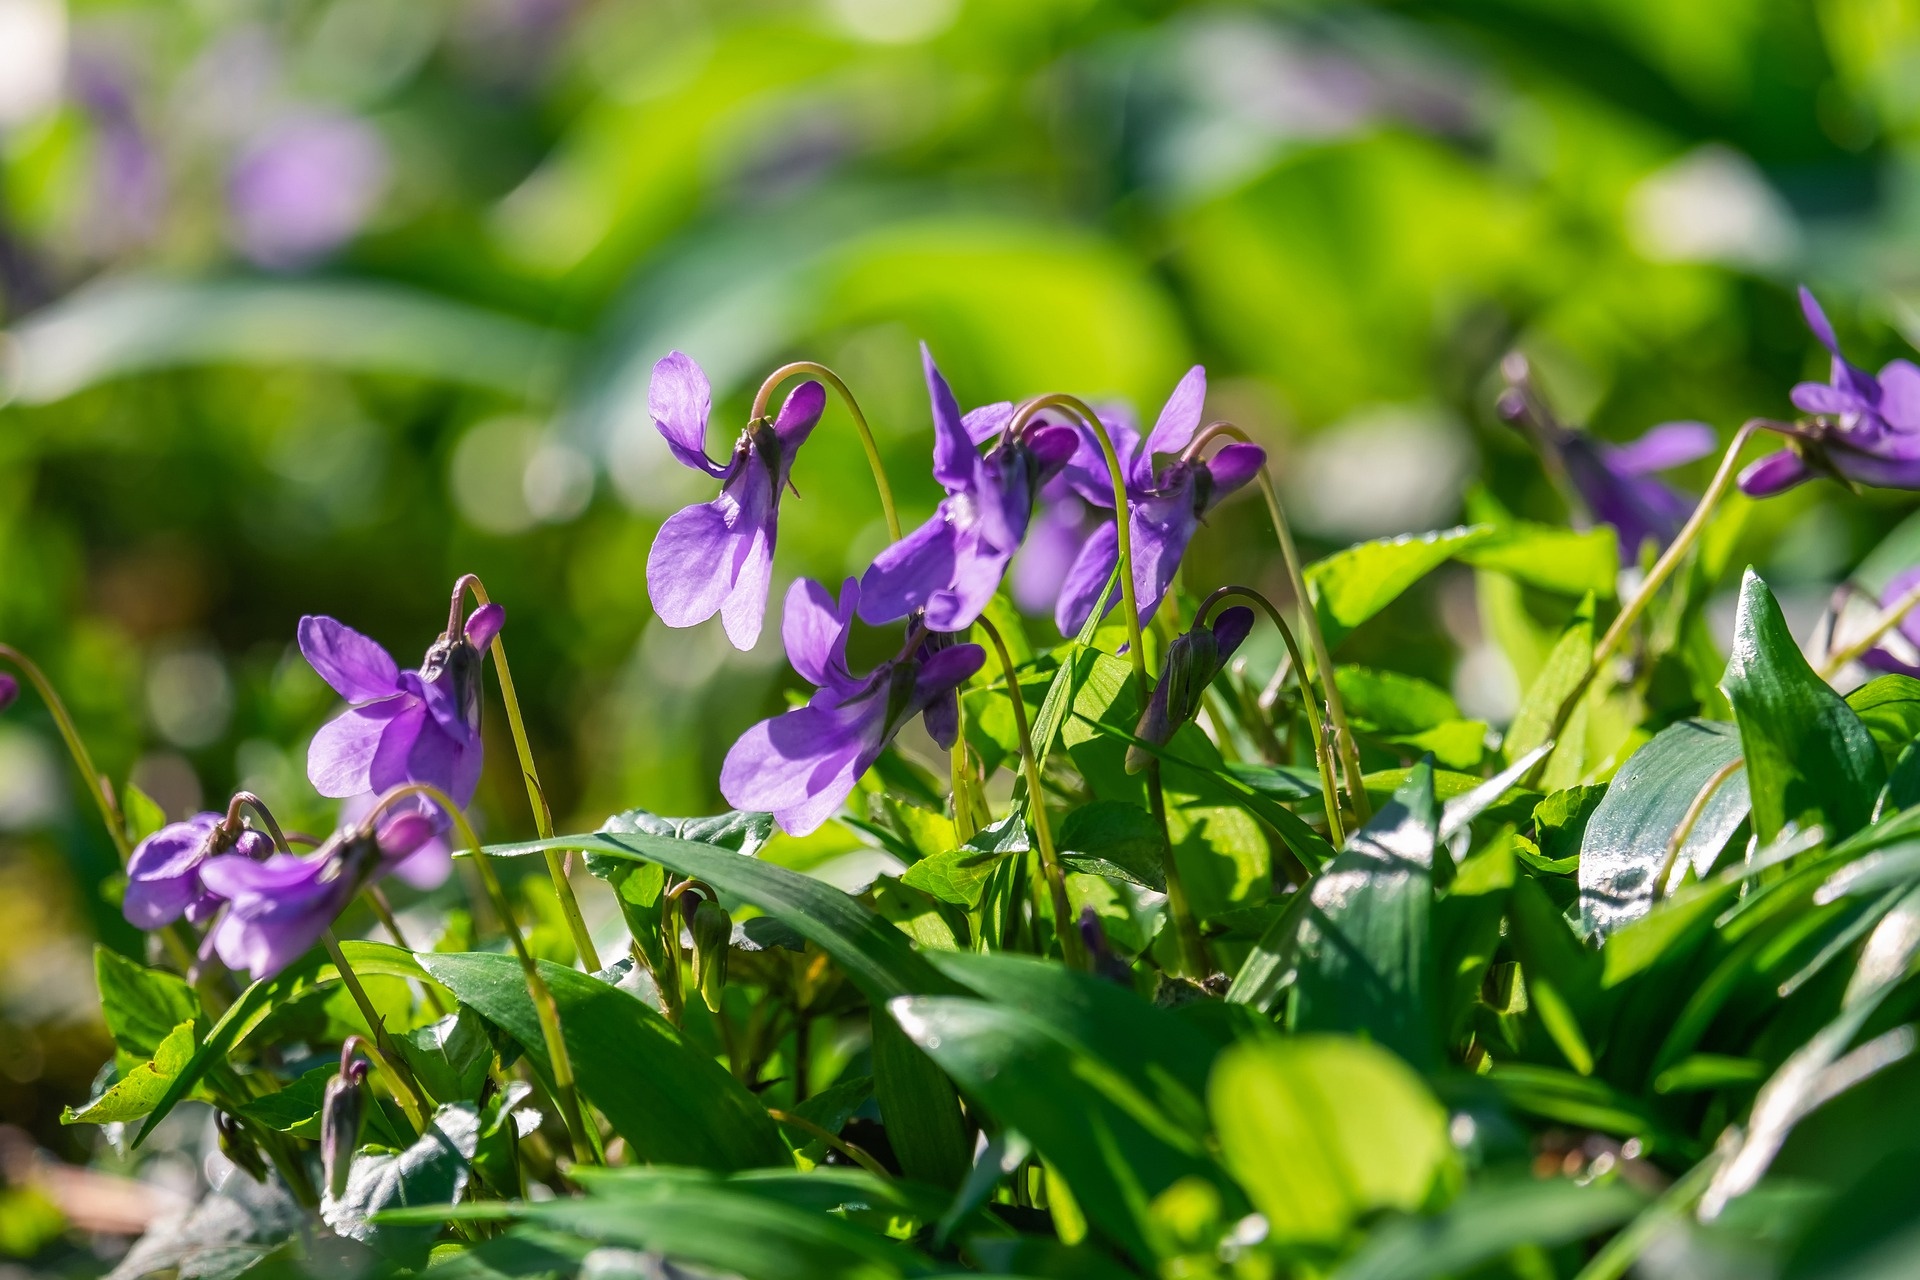 Violets have heart-shaped leaves with purple-blue flowers